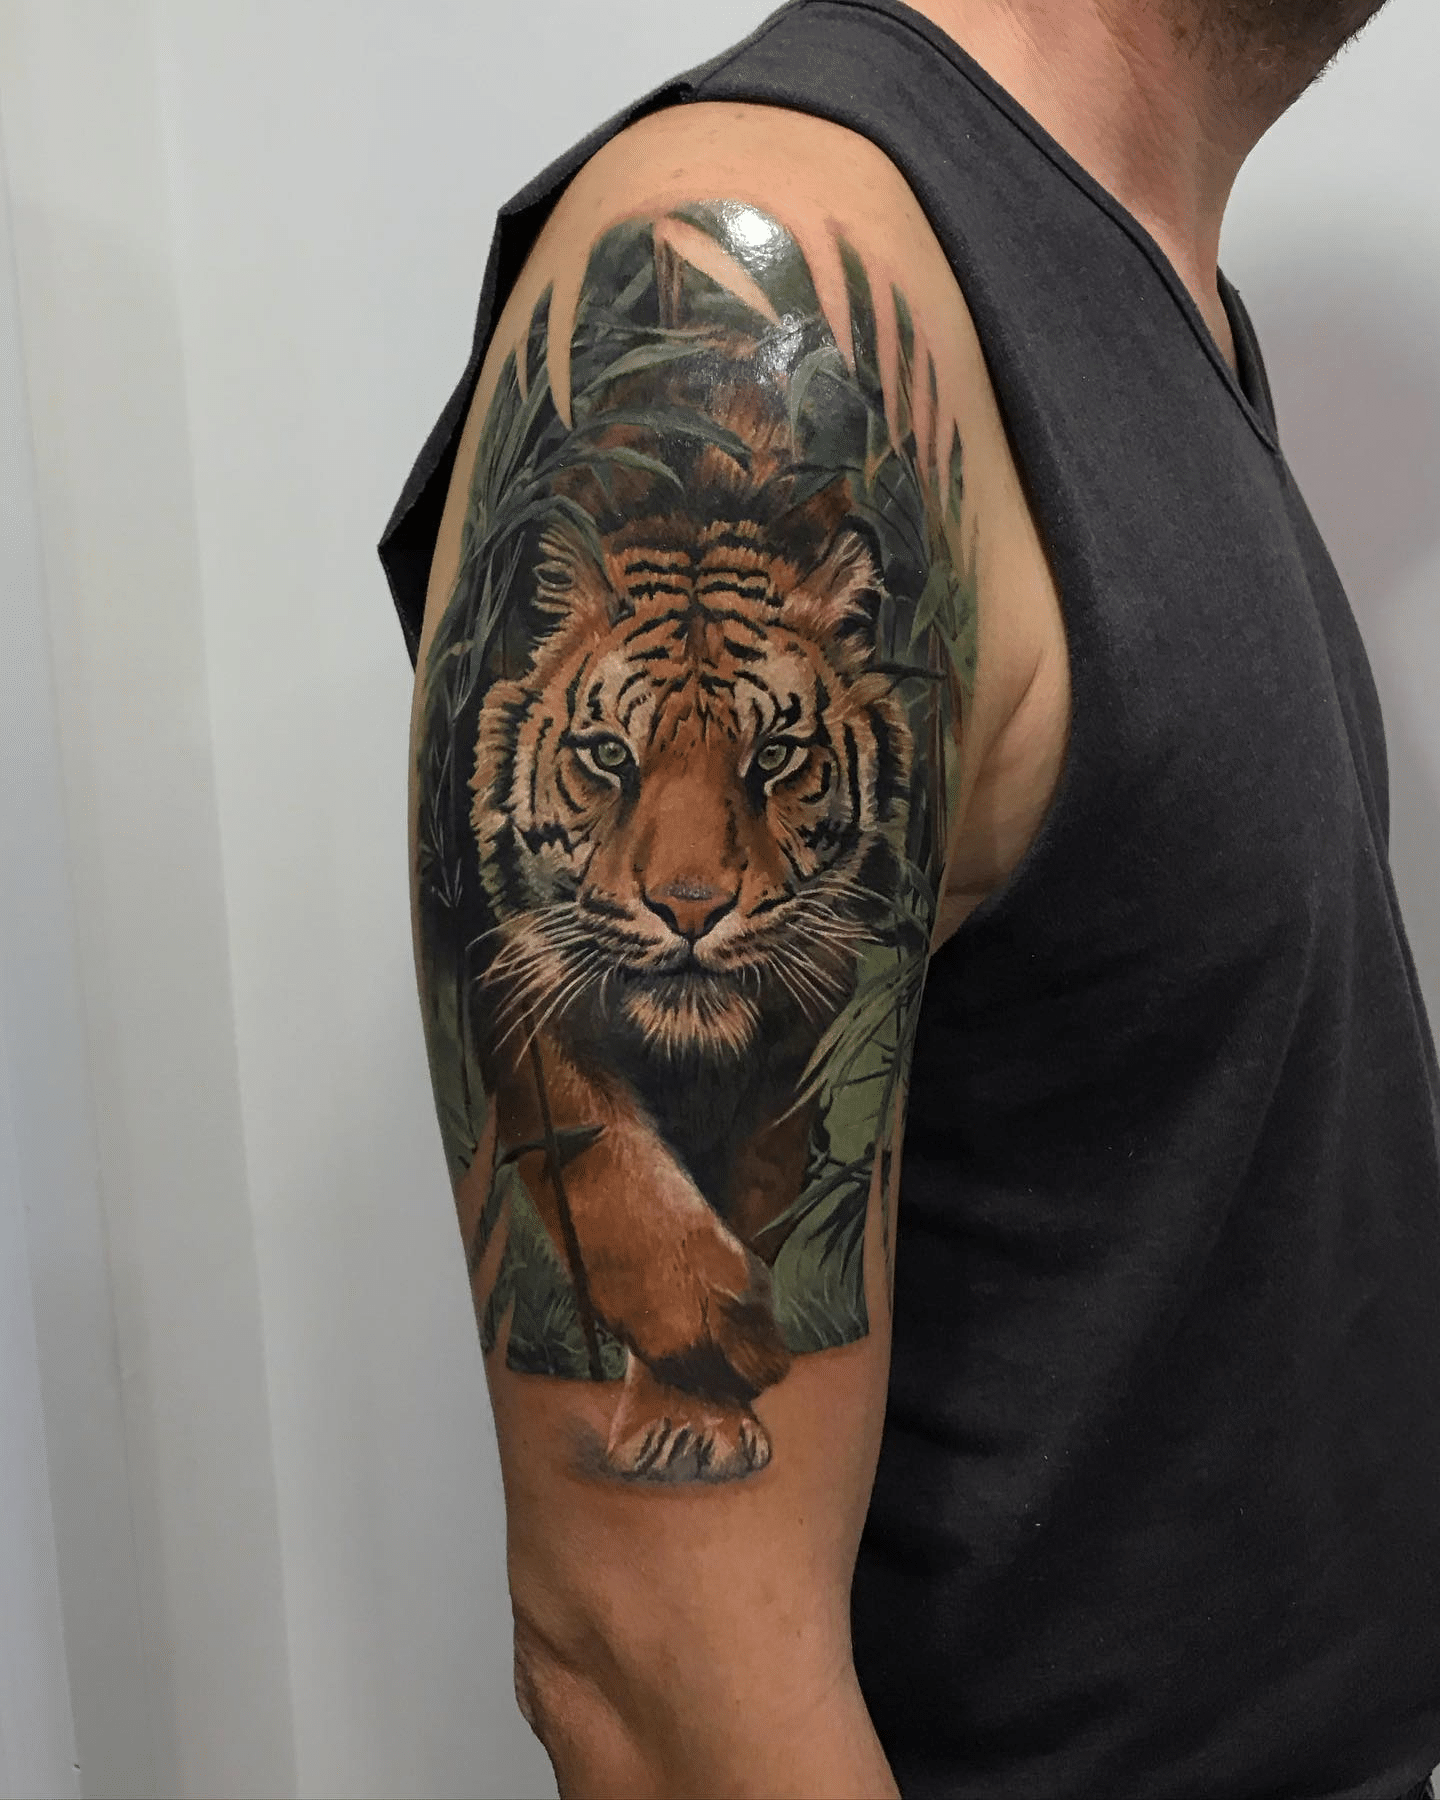 Tiger Tattoo on the Arm